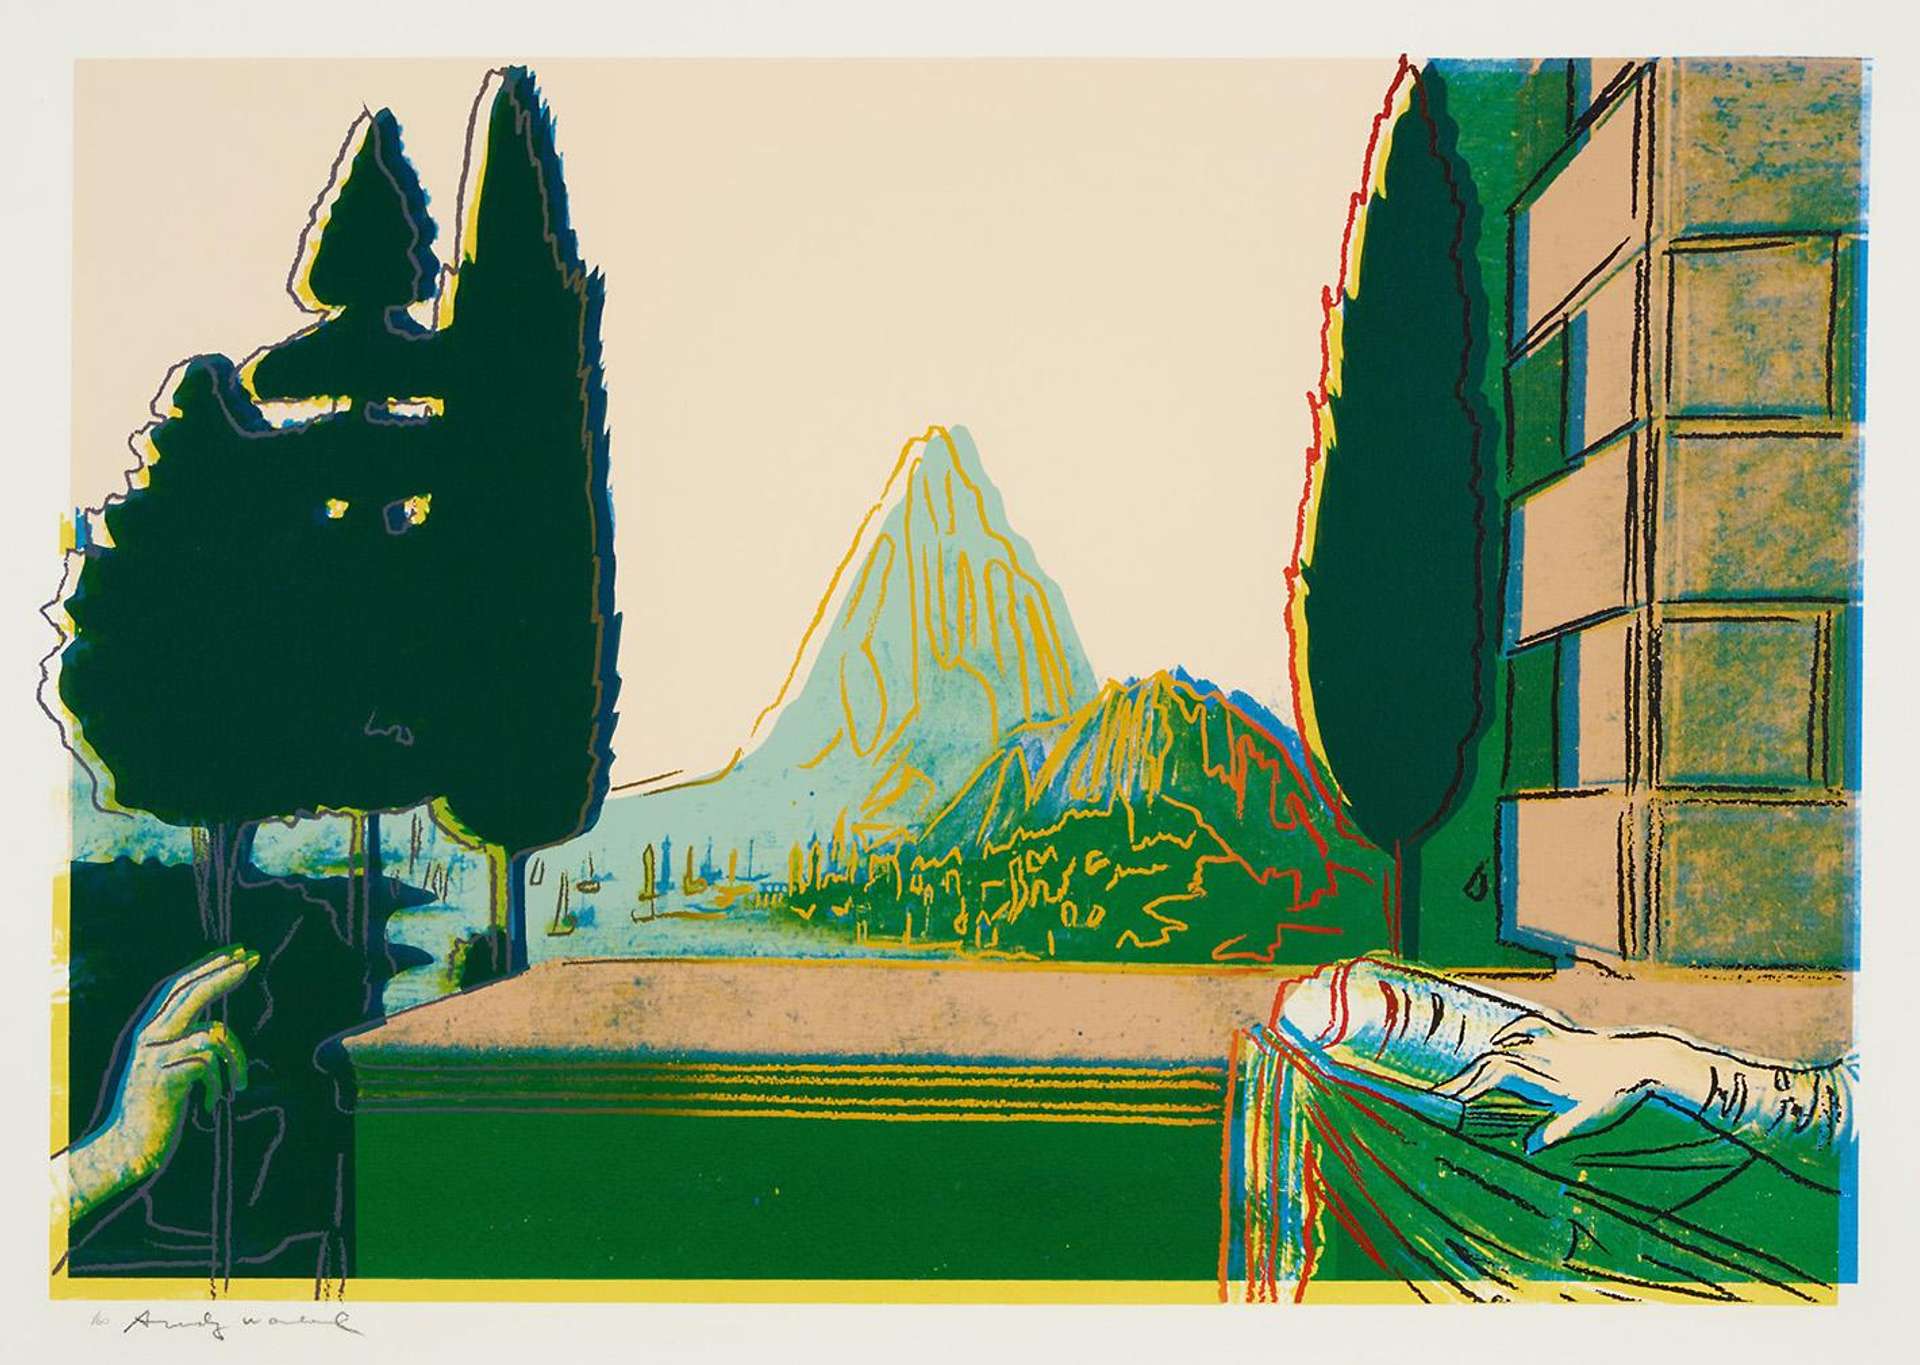 This image by Warhol closely crops Leonardo Da Vinci's Annunciation and focuses solely on the landscape on the background. It shows a steep mountain in the centre of the composition, with cypress trees on either side. In this instance, the colour palette is composed of greens and yellows.